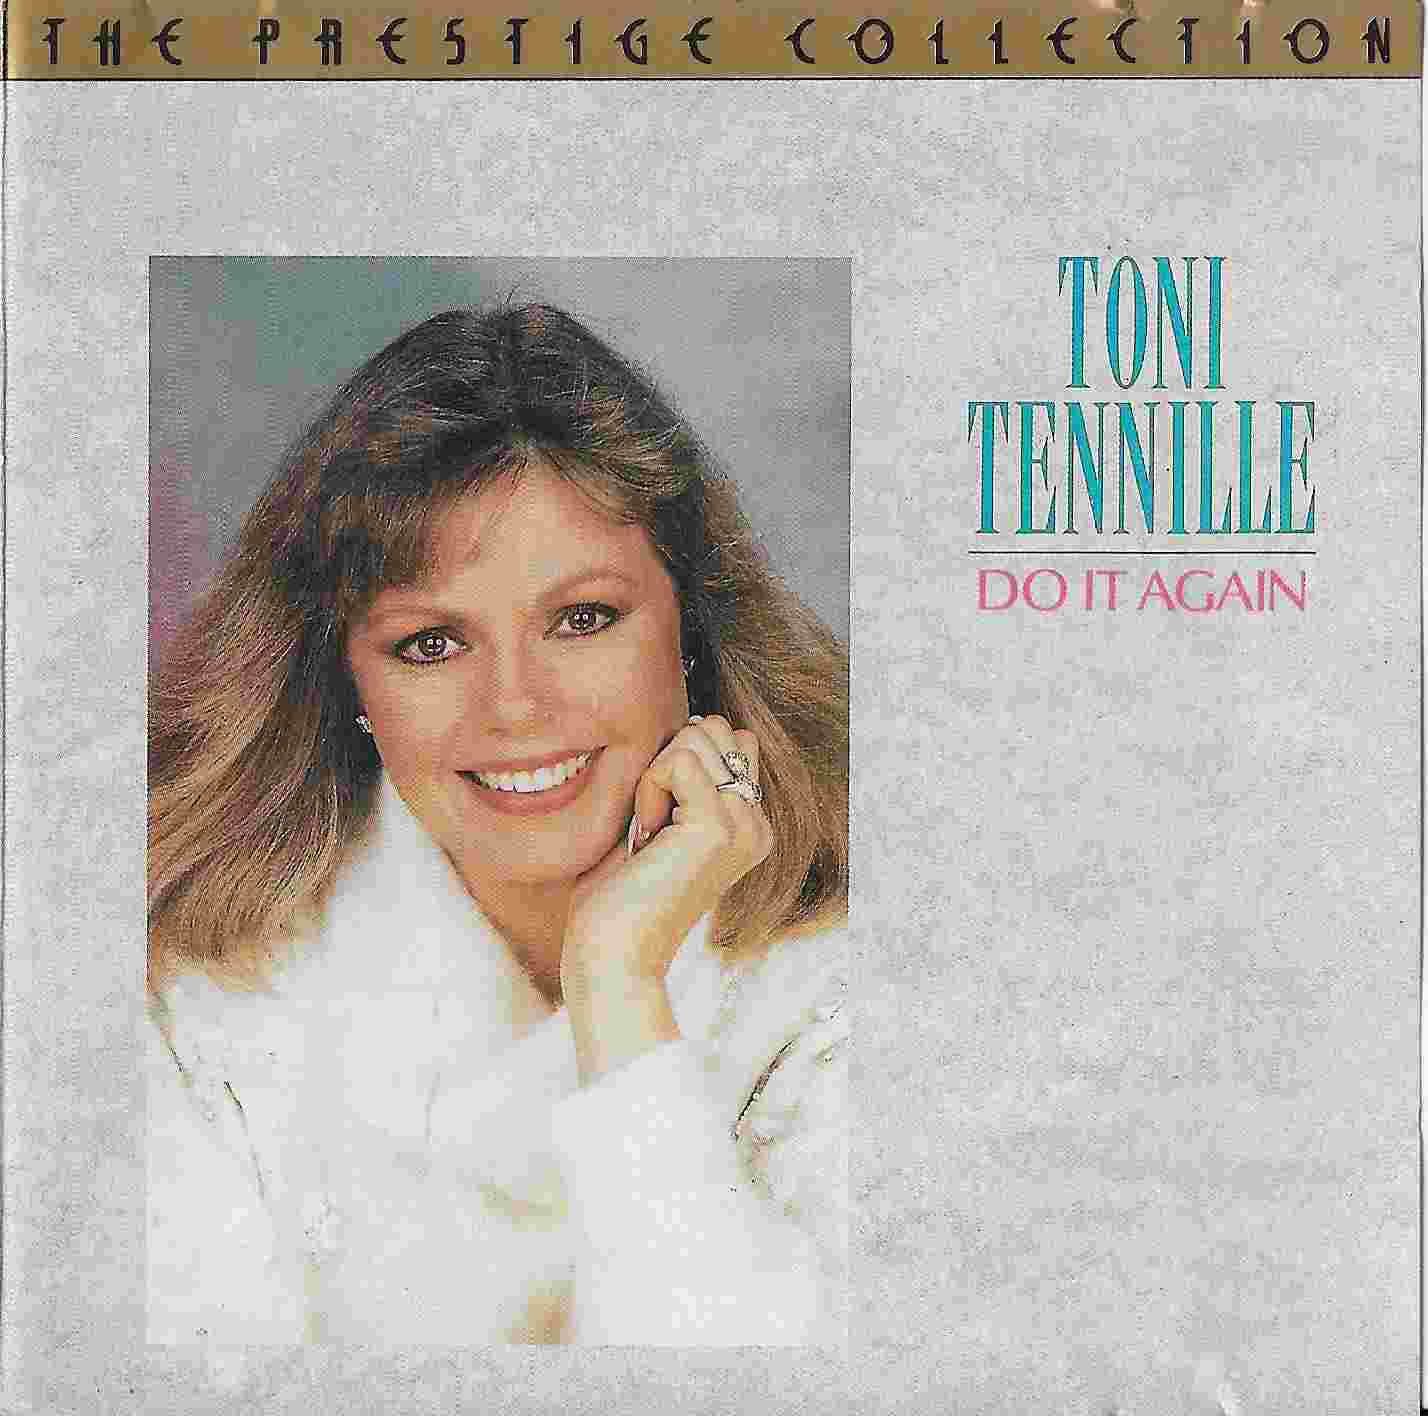 Picture of Do it again by artist Toni Tennille from the BBC cds - Records and Tapes library